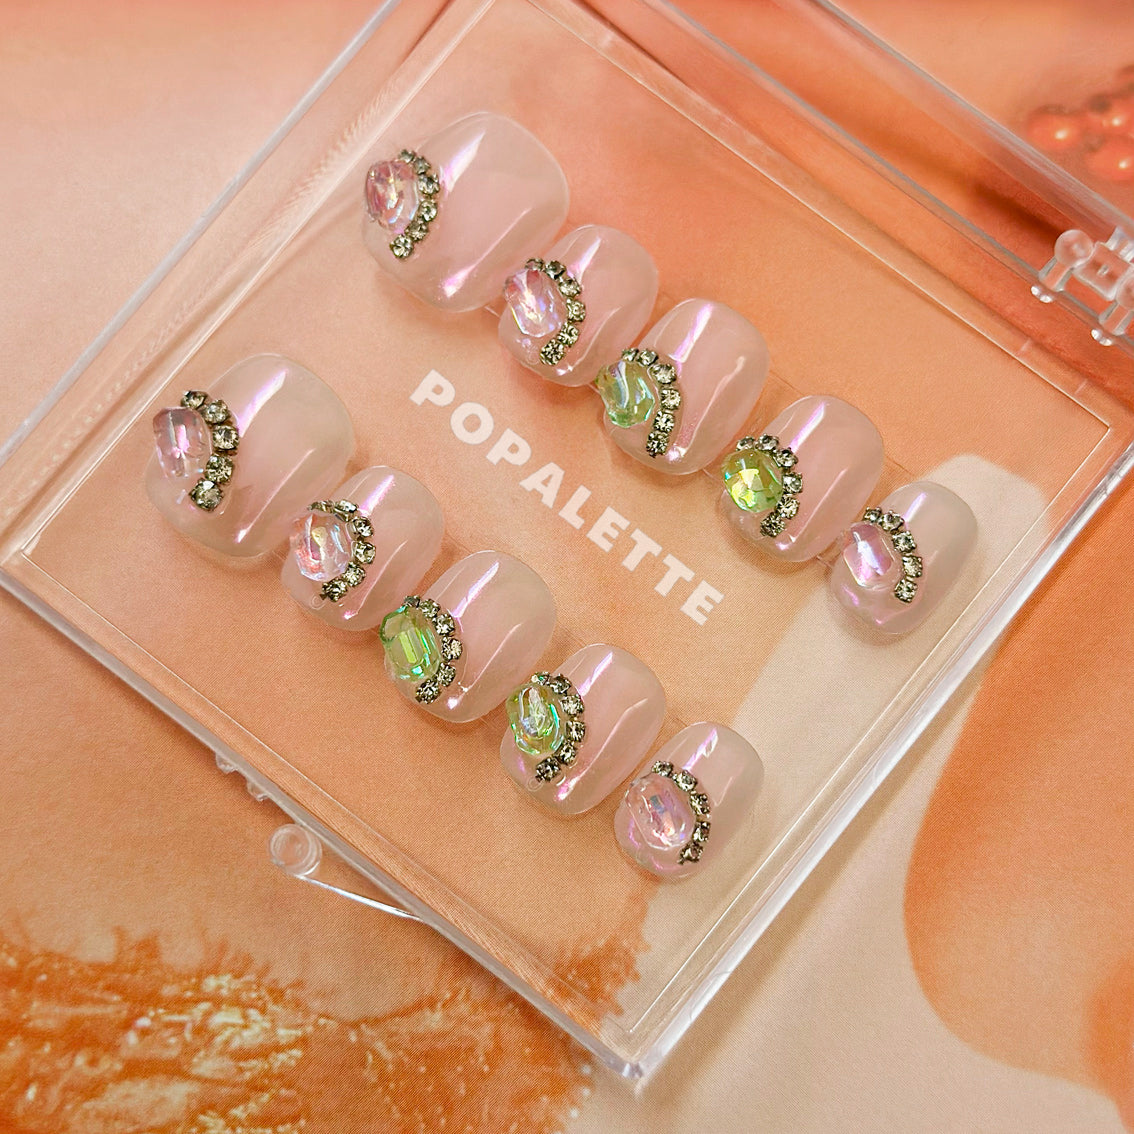 POPALETTE Sweet Sugar Cubes (Pearlescent) Diamond Charms Press On Nails 100% Short Round Shape - Handmade Press On Nails Reusable